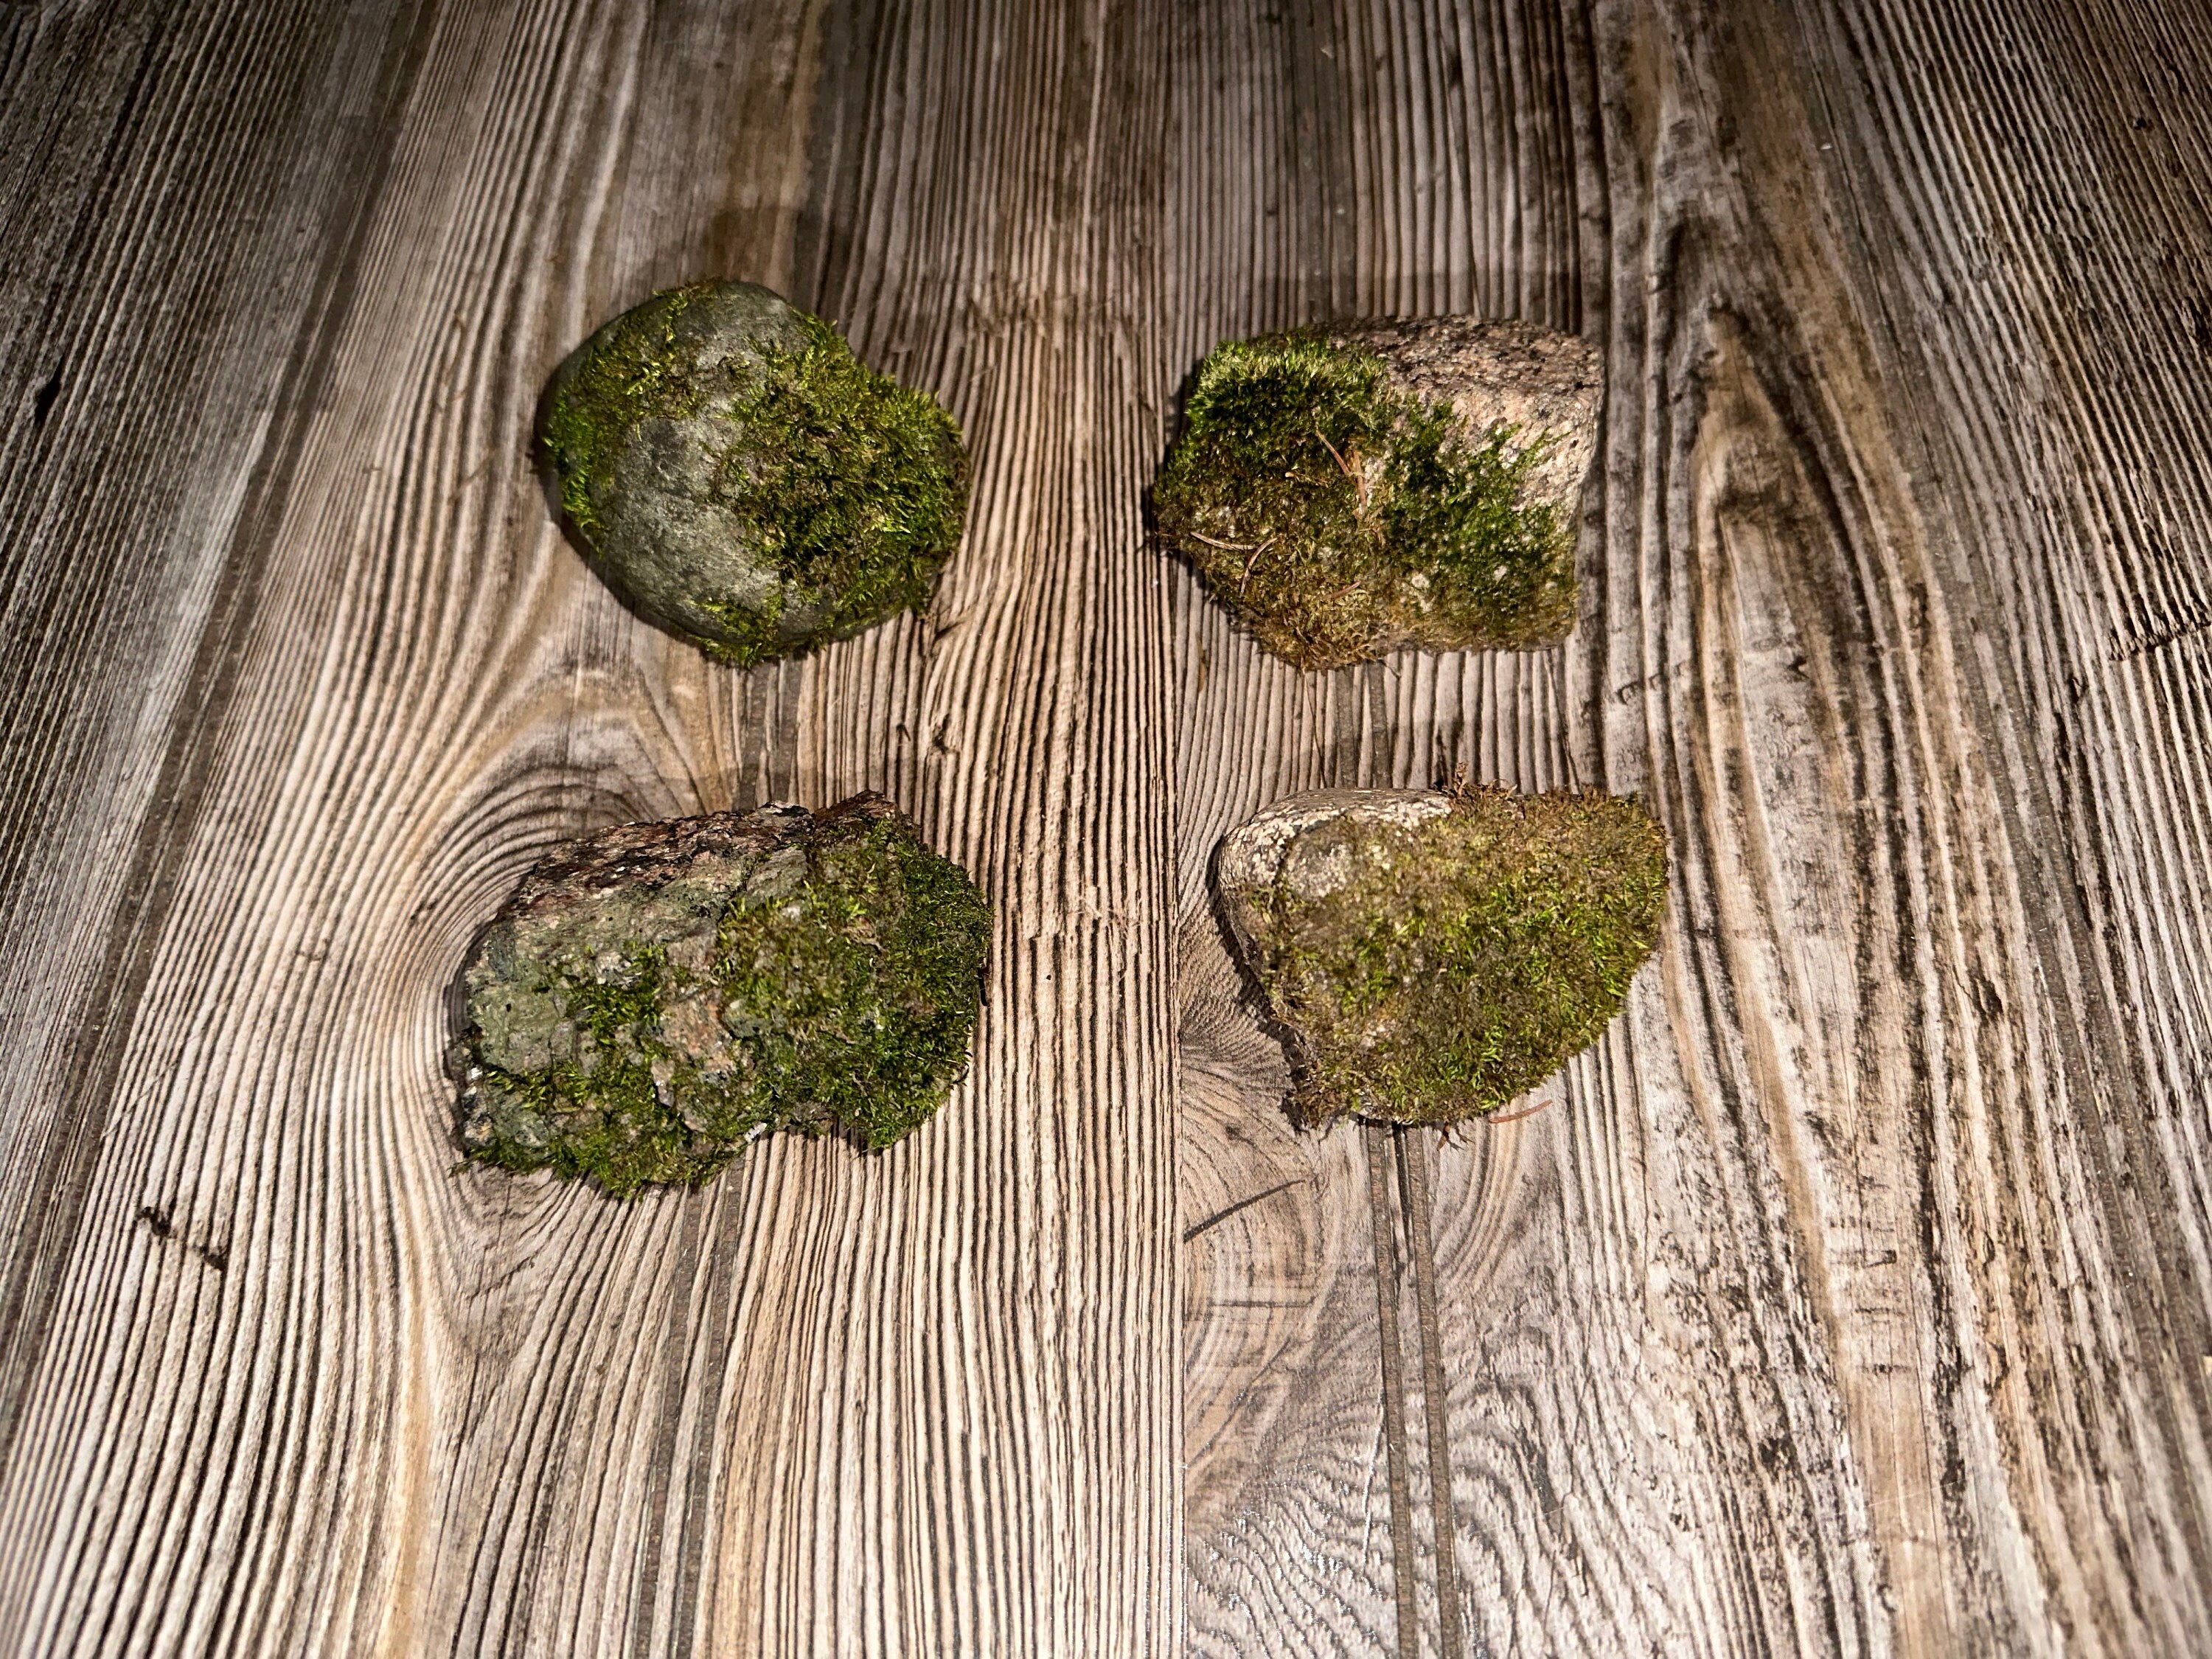 Four Mossy Rocks, Live Moss Covered Stones, About 2-3 Inches in Size